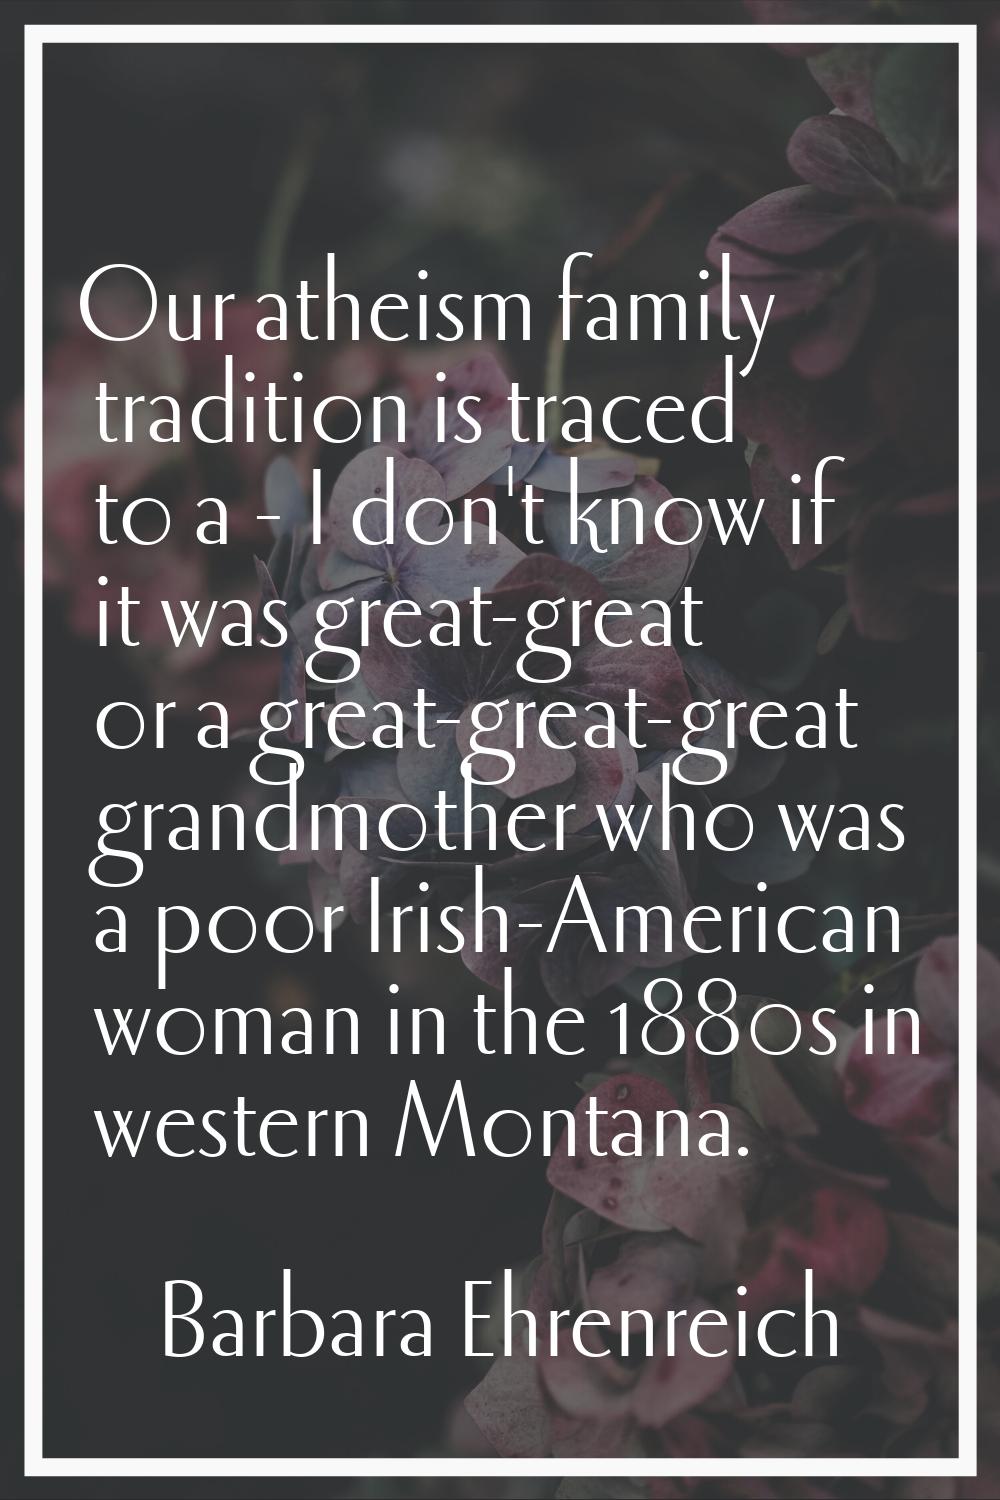 Our atheism family tradition is traced to a - I don't know if it was great-great or a great-great-g